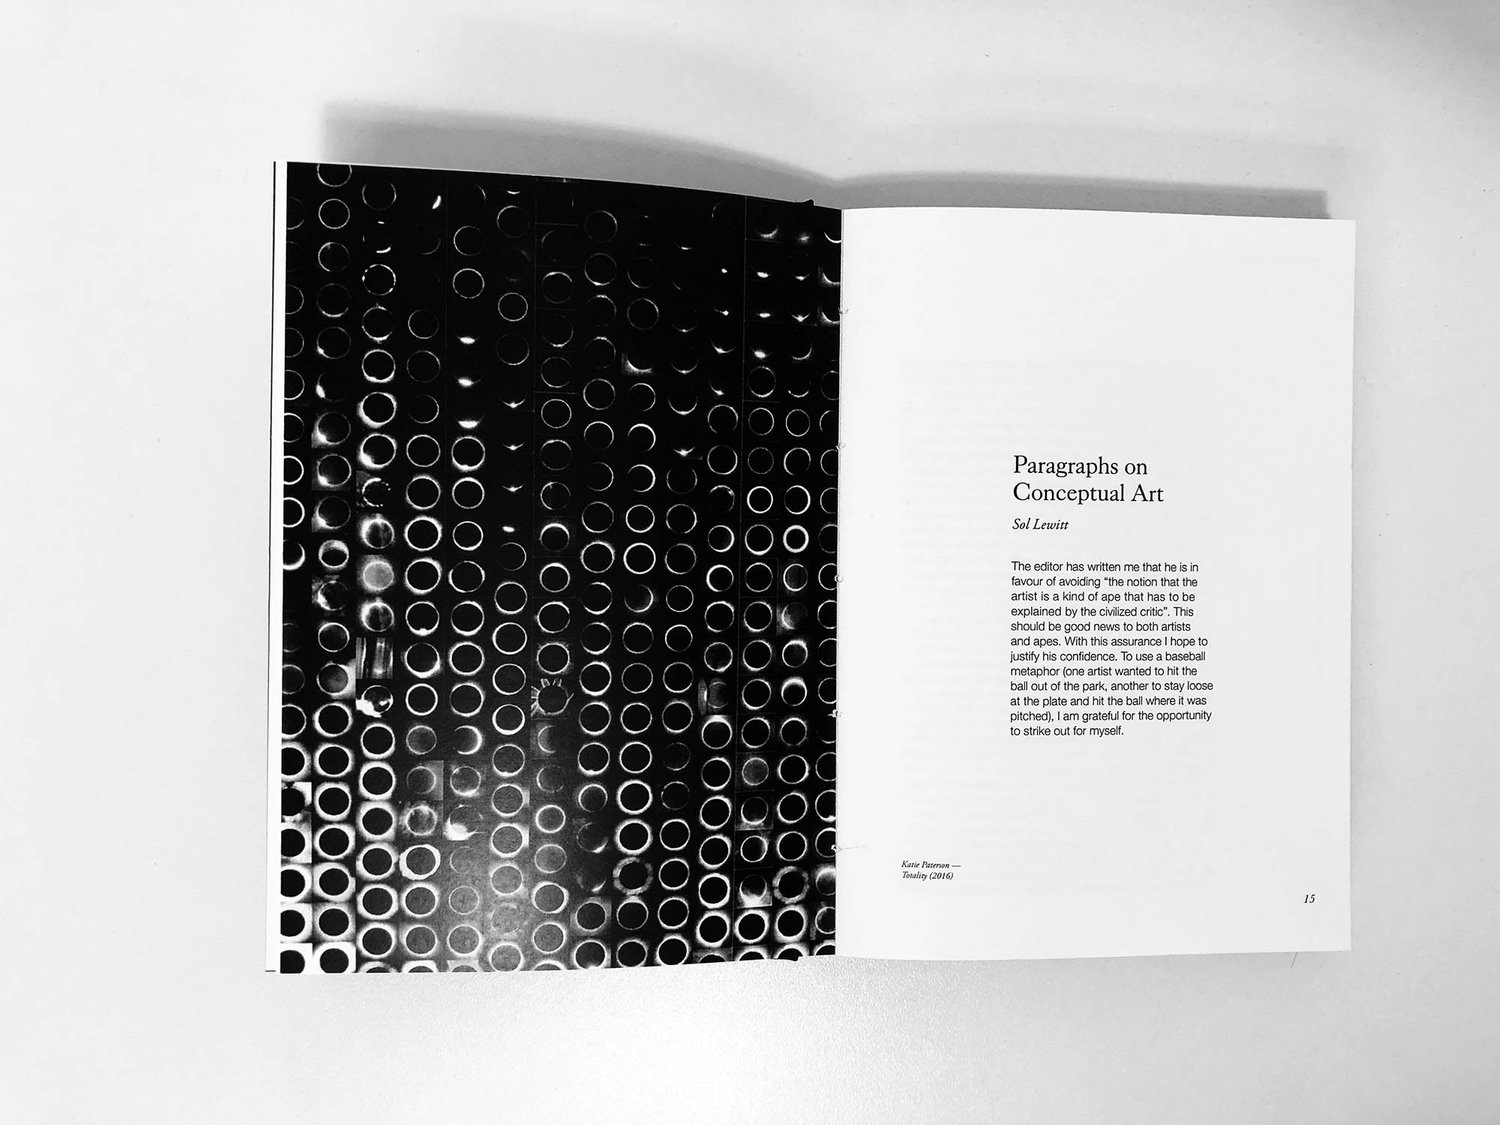 Opening spread - Paragraphs on Conceptual Art